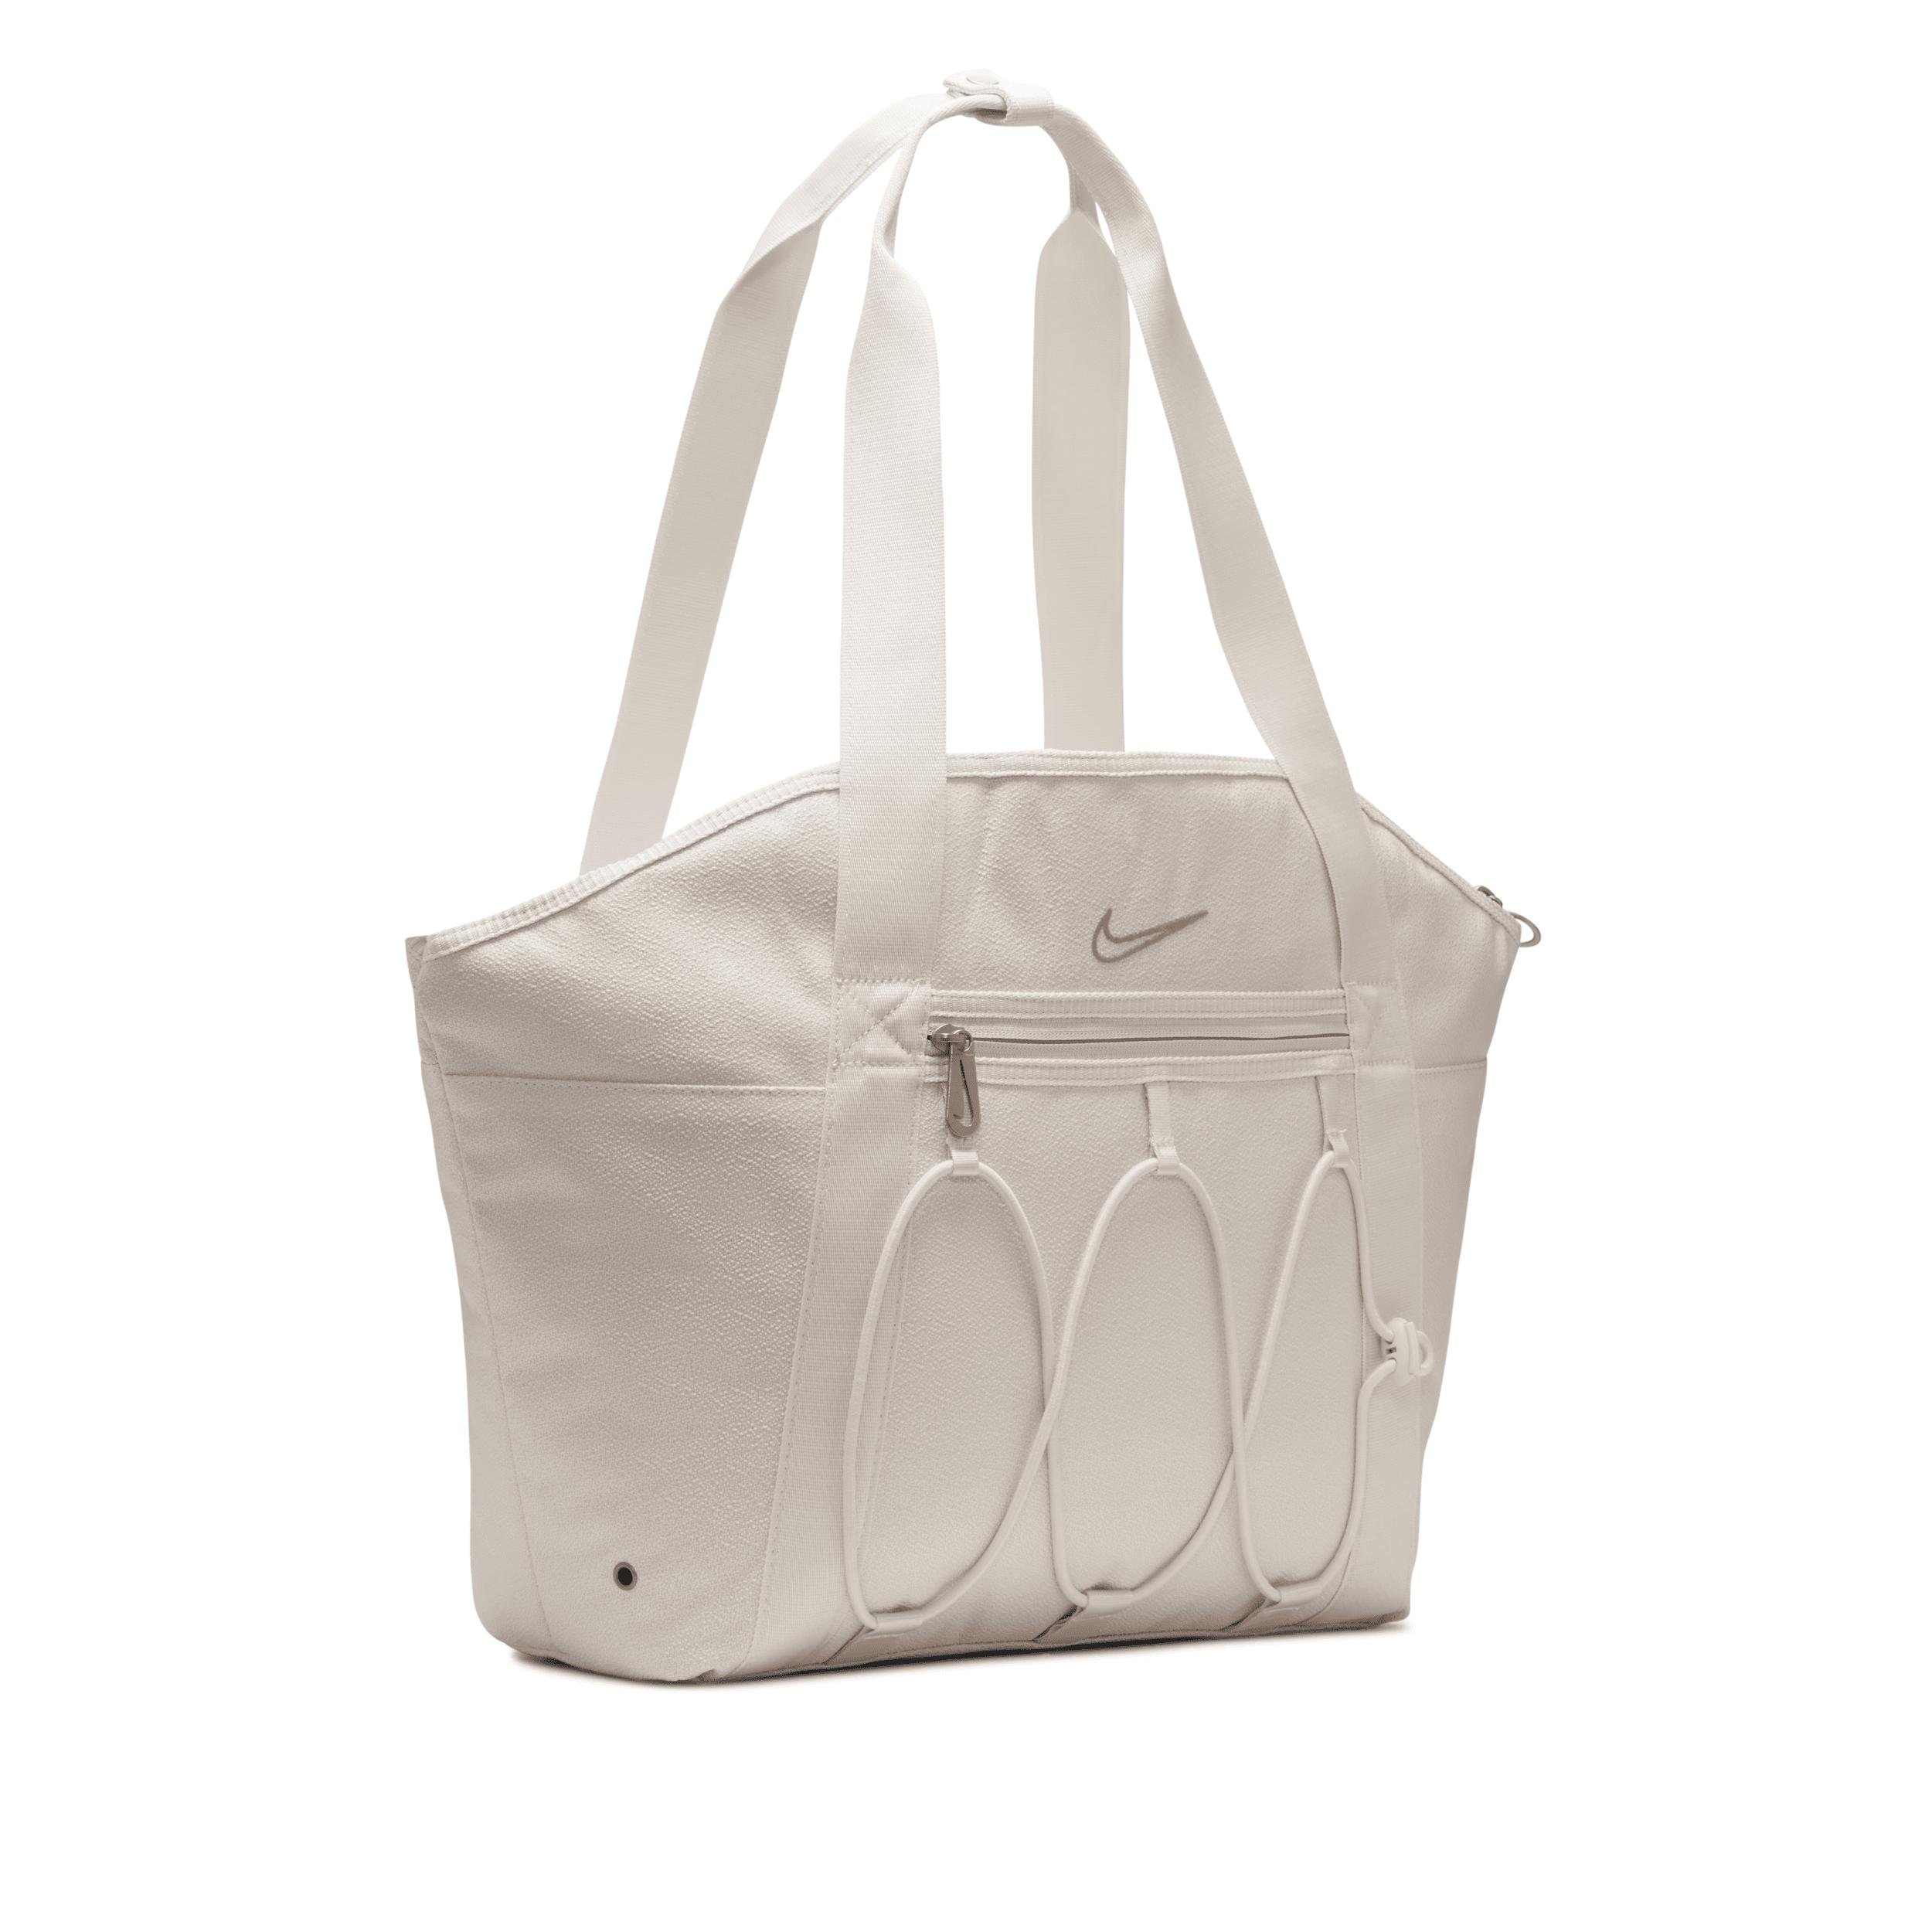 Nike One Training Tote Bag in Brown